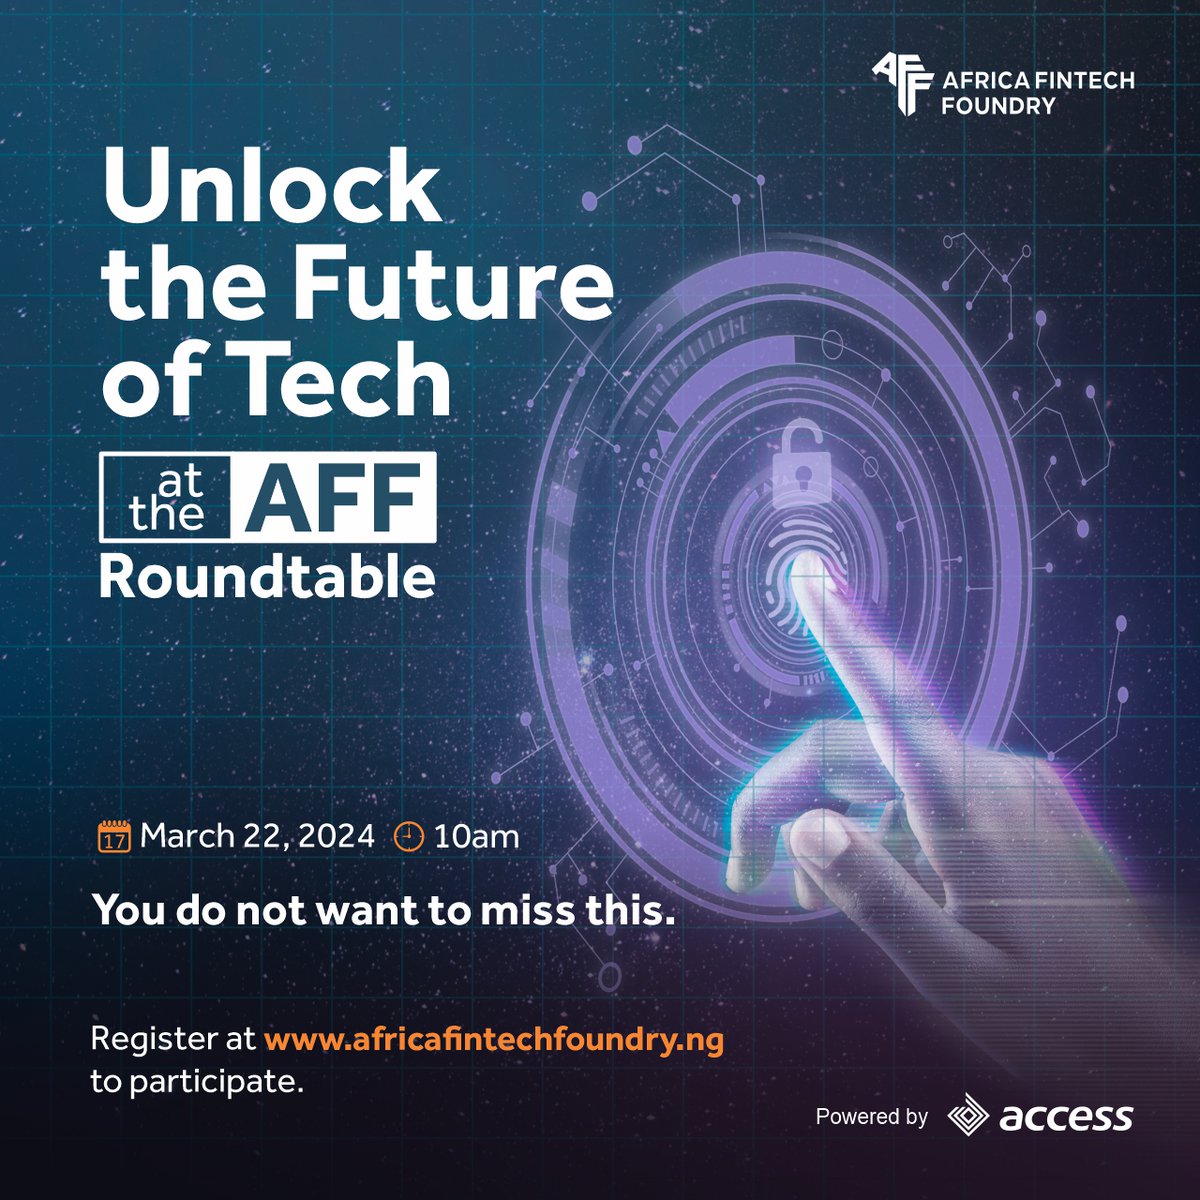 This Friday, join us at the AFF Roundtable Talk 5.0 for insightful discussions and practical takeaways from industry experts.

Click bit.ly/3PPazpB to register now and secure your spot

#AFFRoundtableTalk5 #AfricanTechFoundry